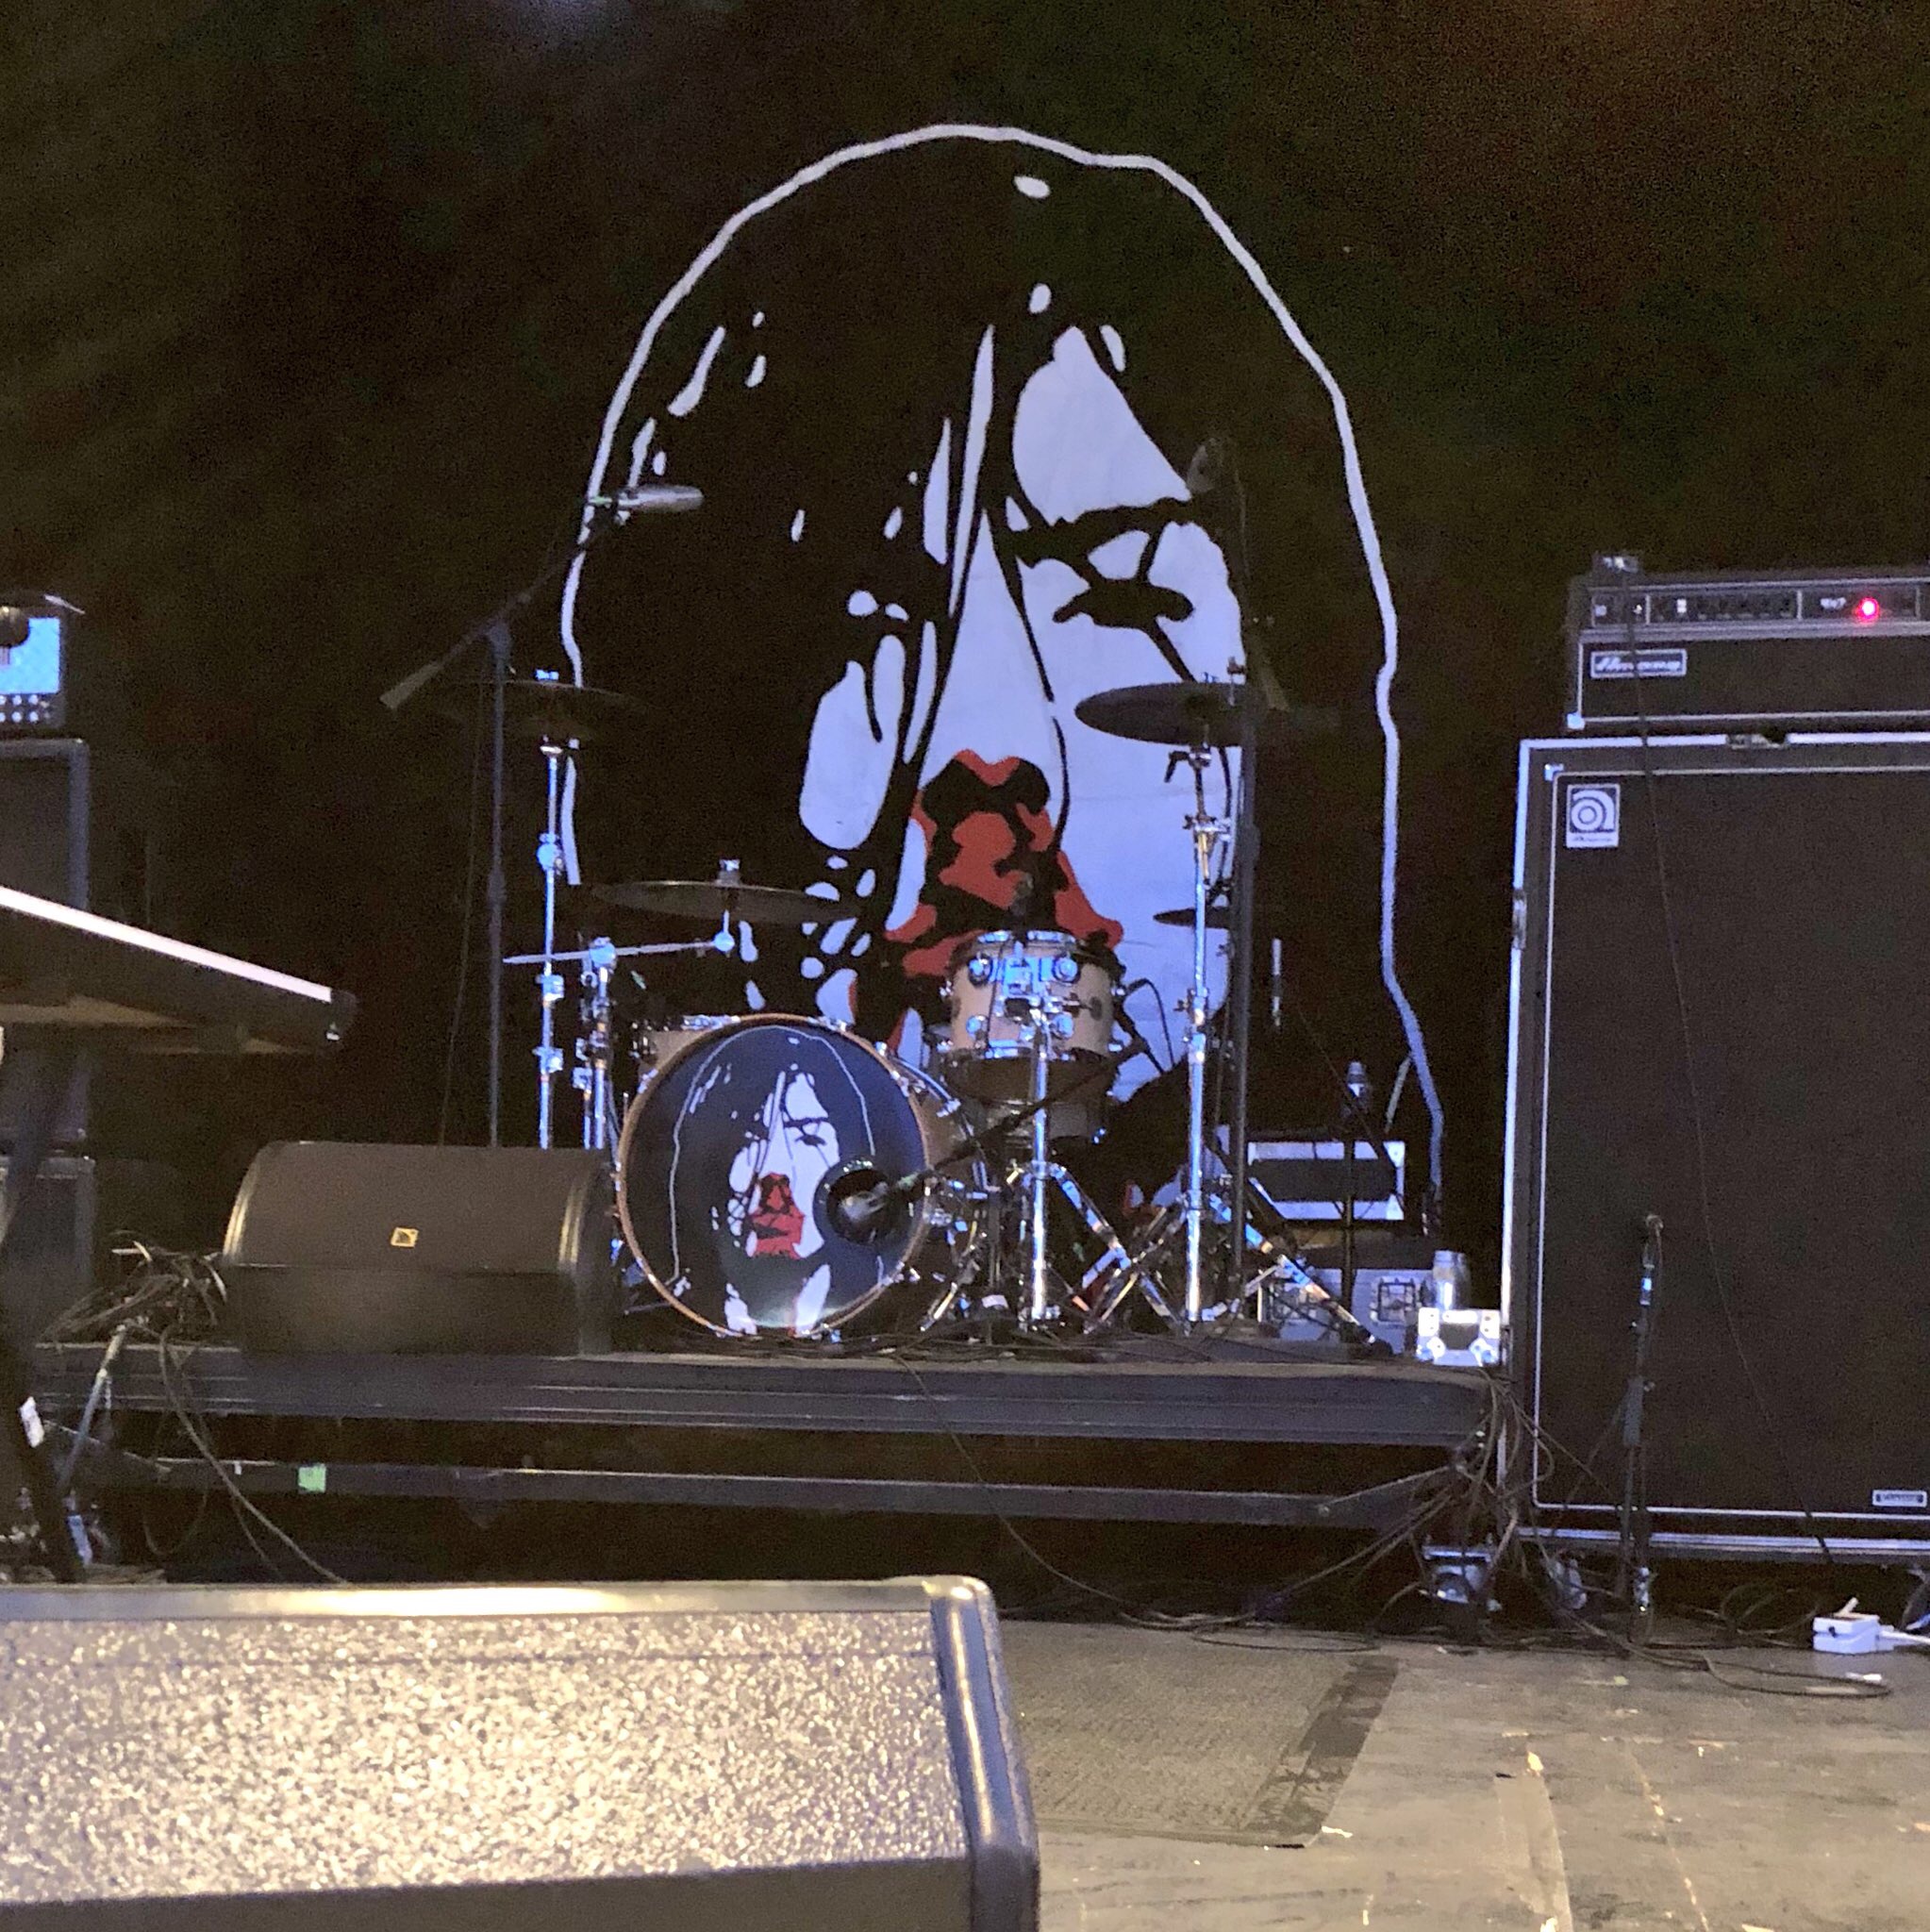 The stage backdrop for Andrew W.K. at Treefort.